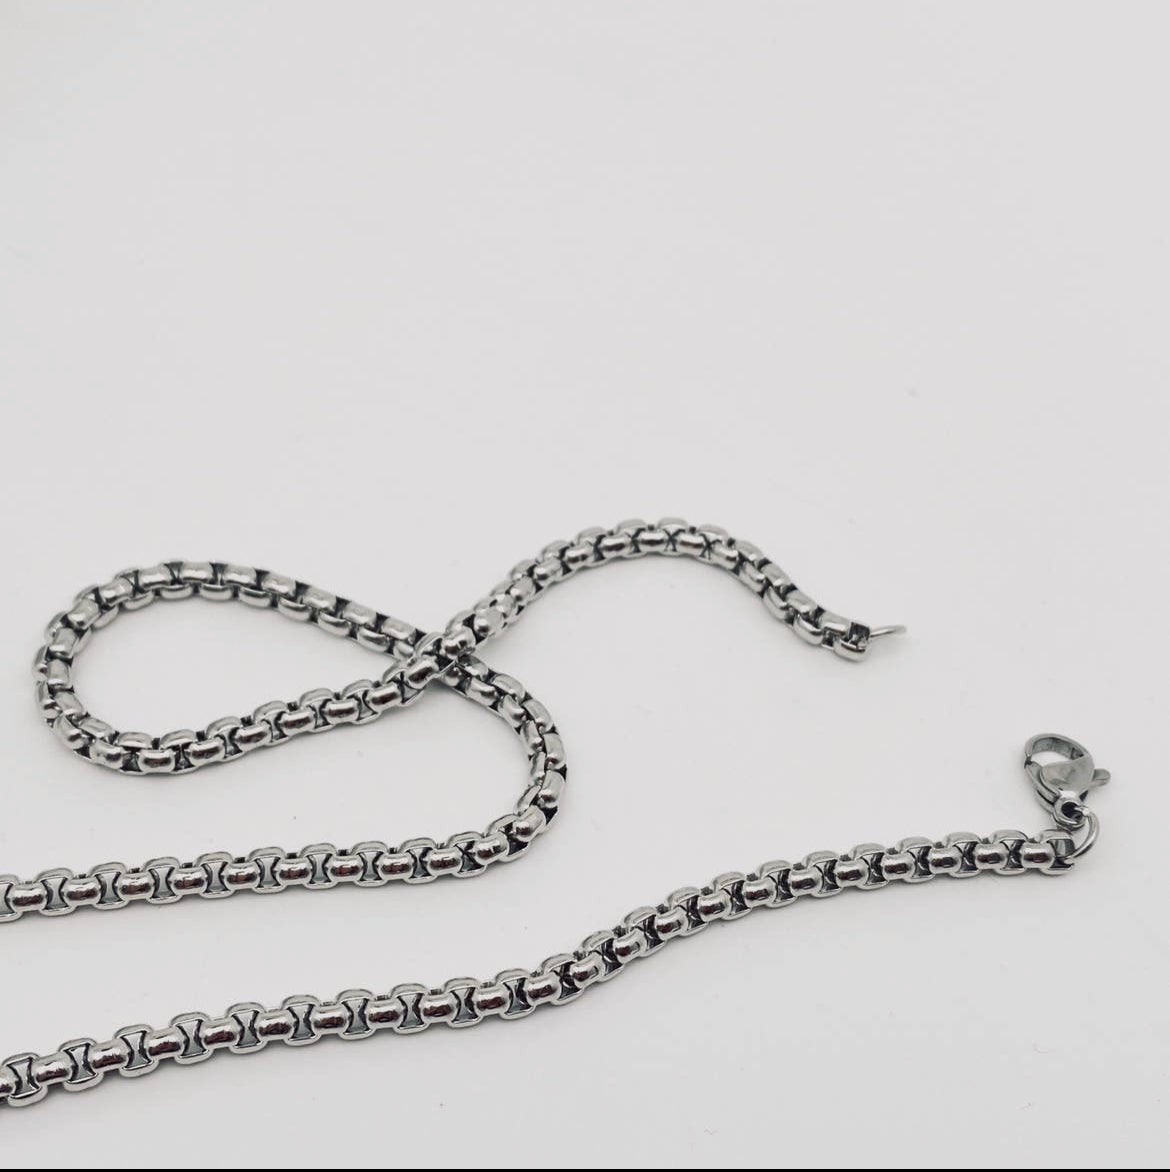 2.5 MM Thick Stainless Steel Square Chain 50 CM to 65 CM in length